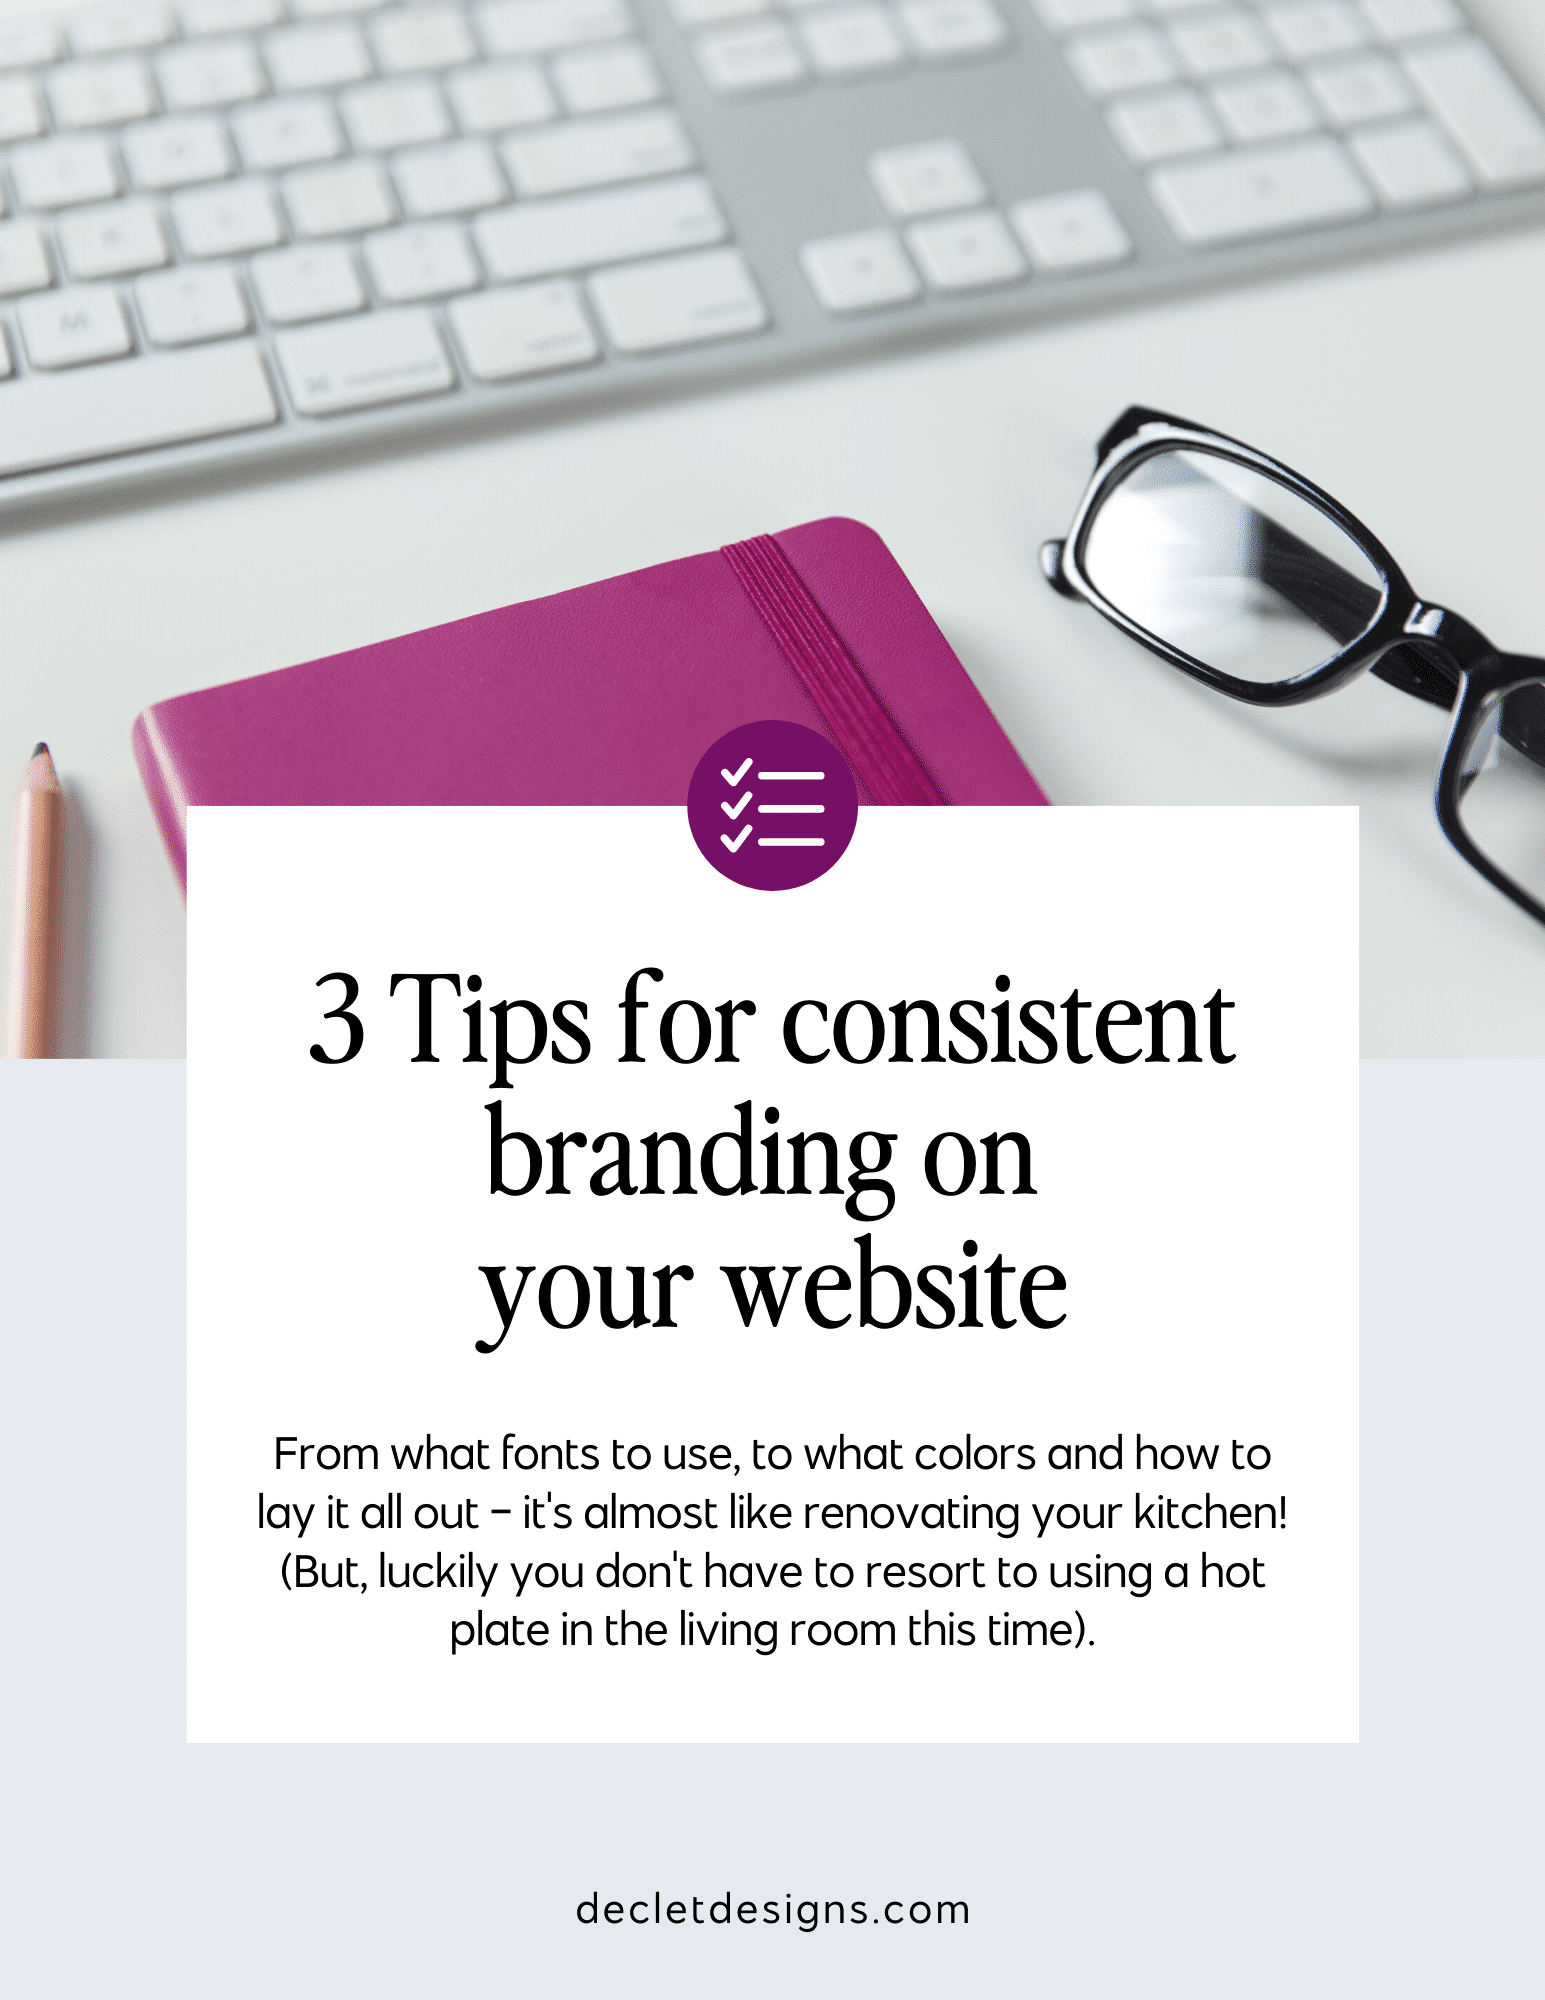 3 tip for consistent branding on your website